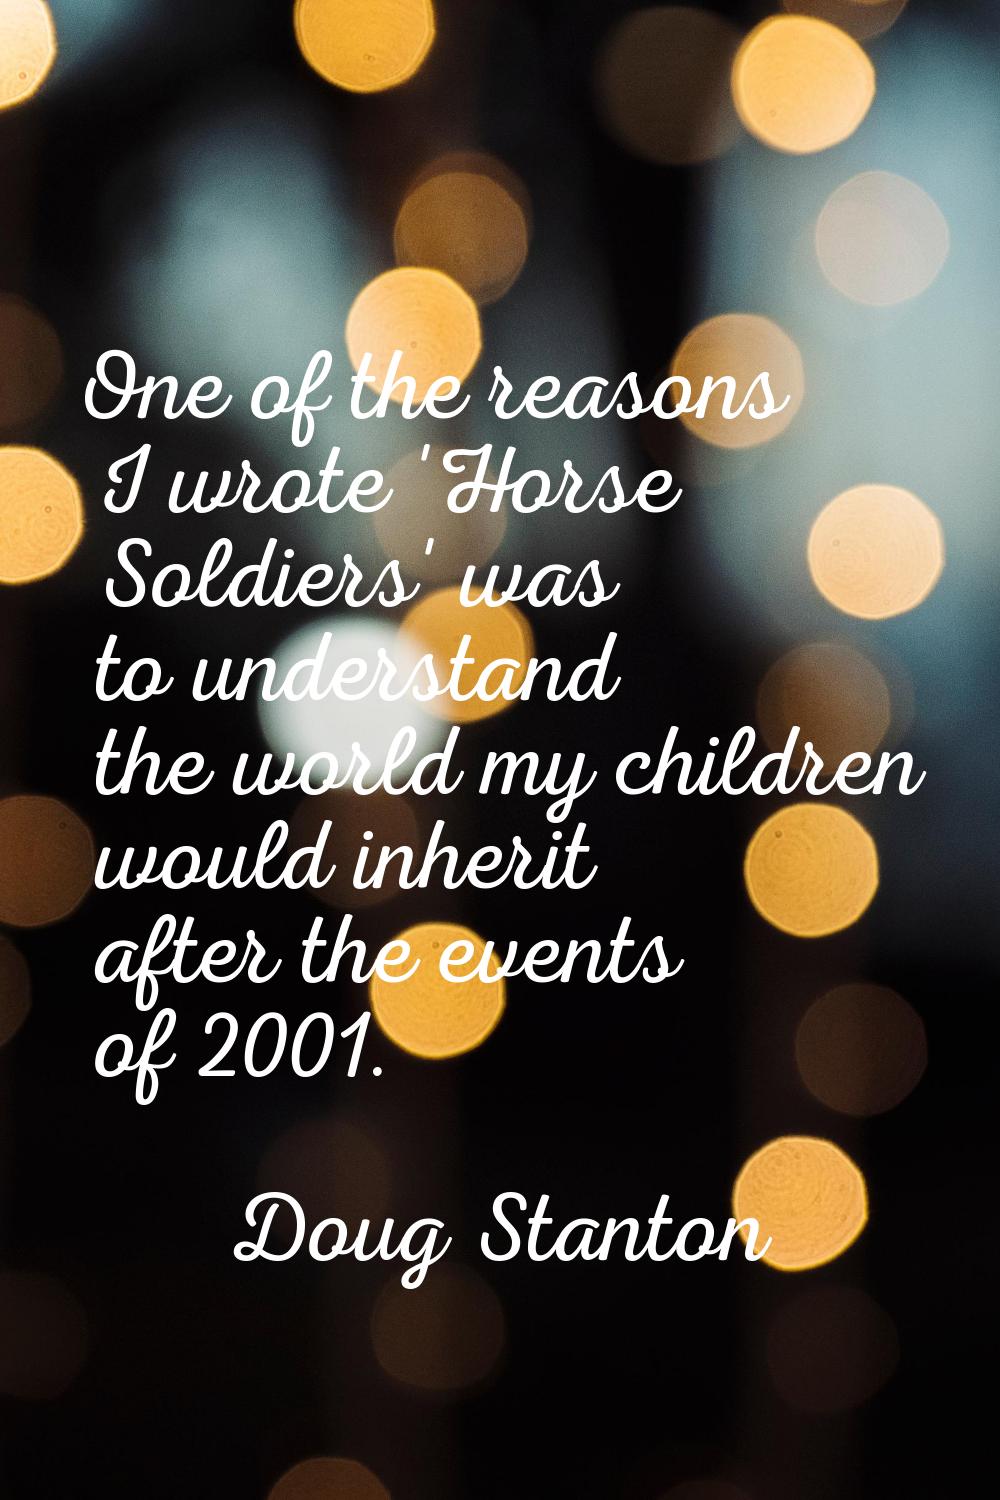 One of the reasons I wrote 'Horse Soldiers' was to understand the world my children would inherit a